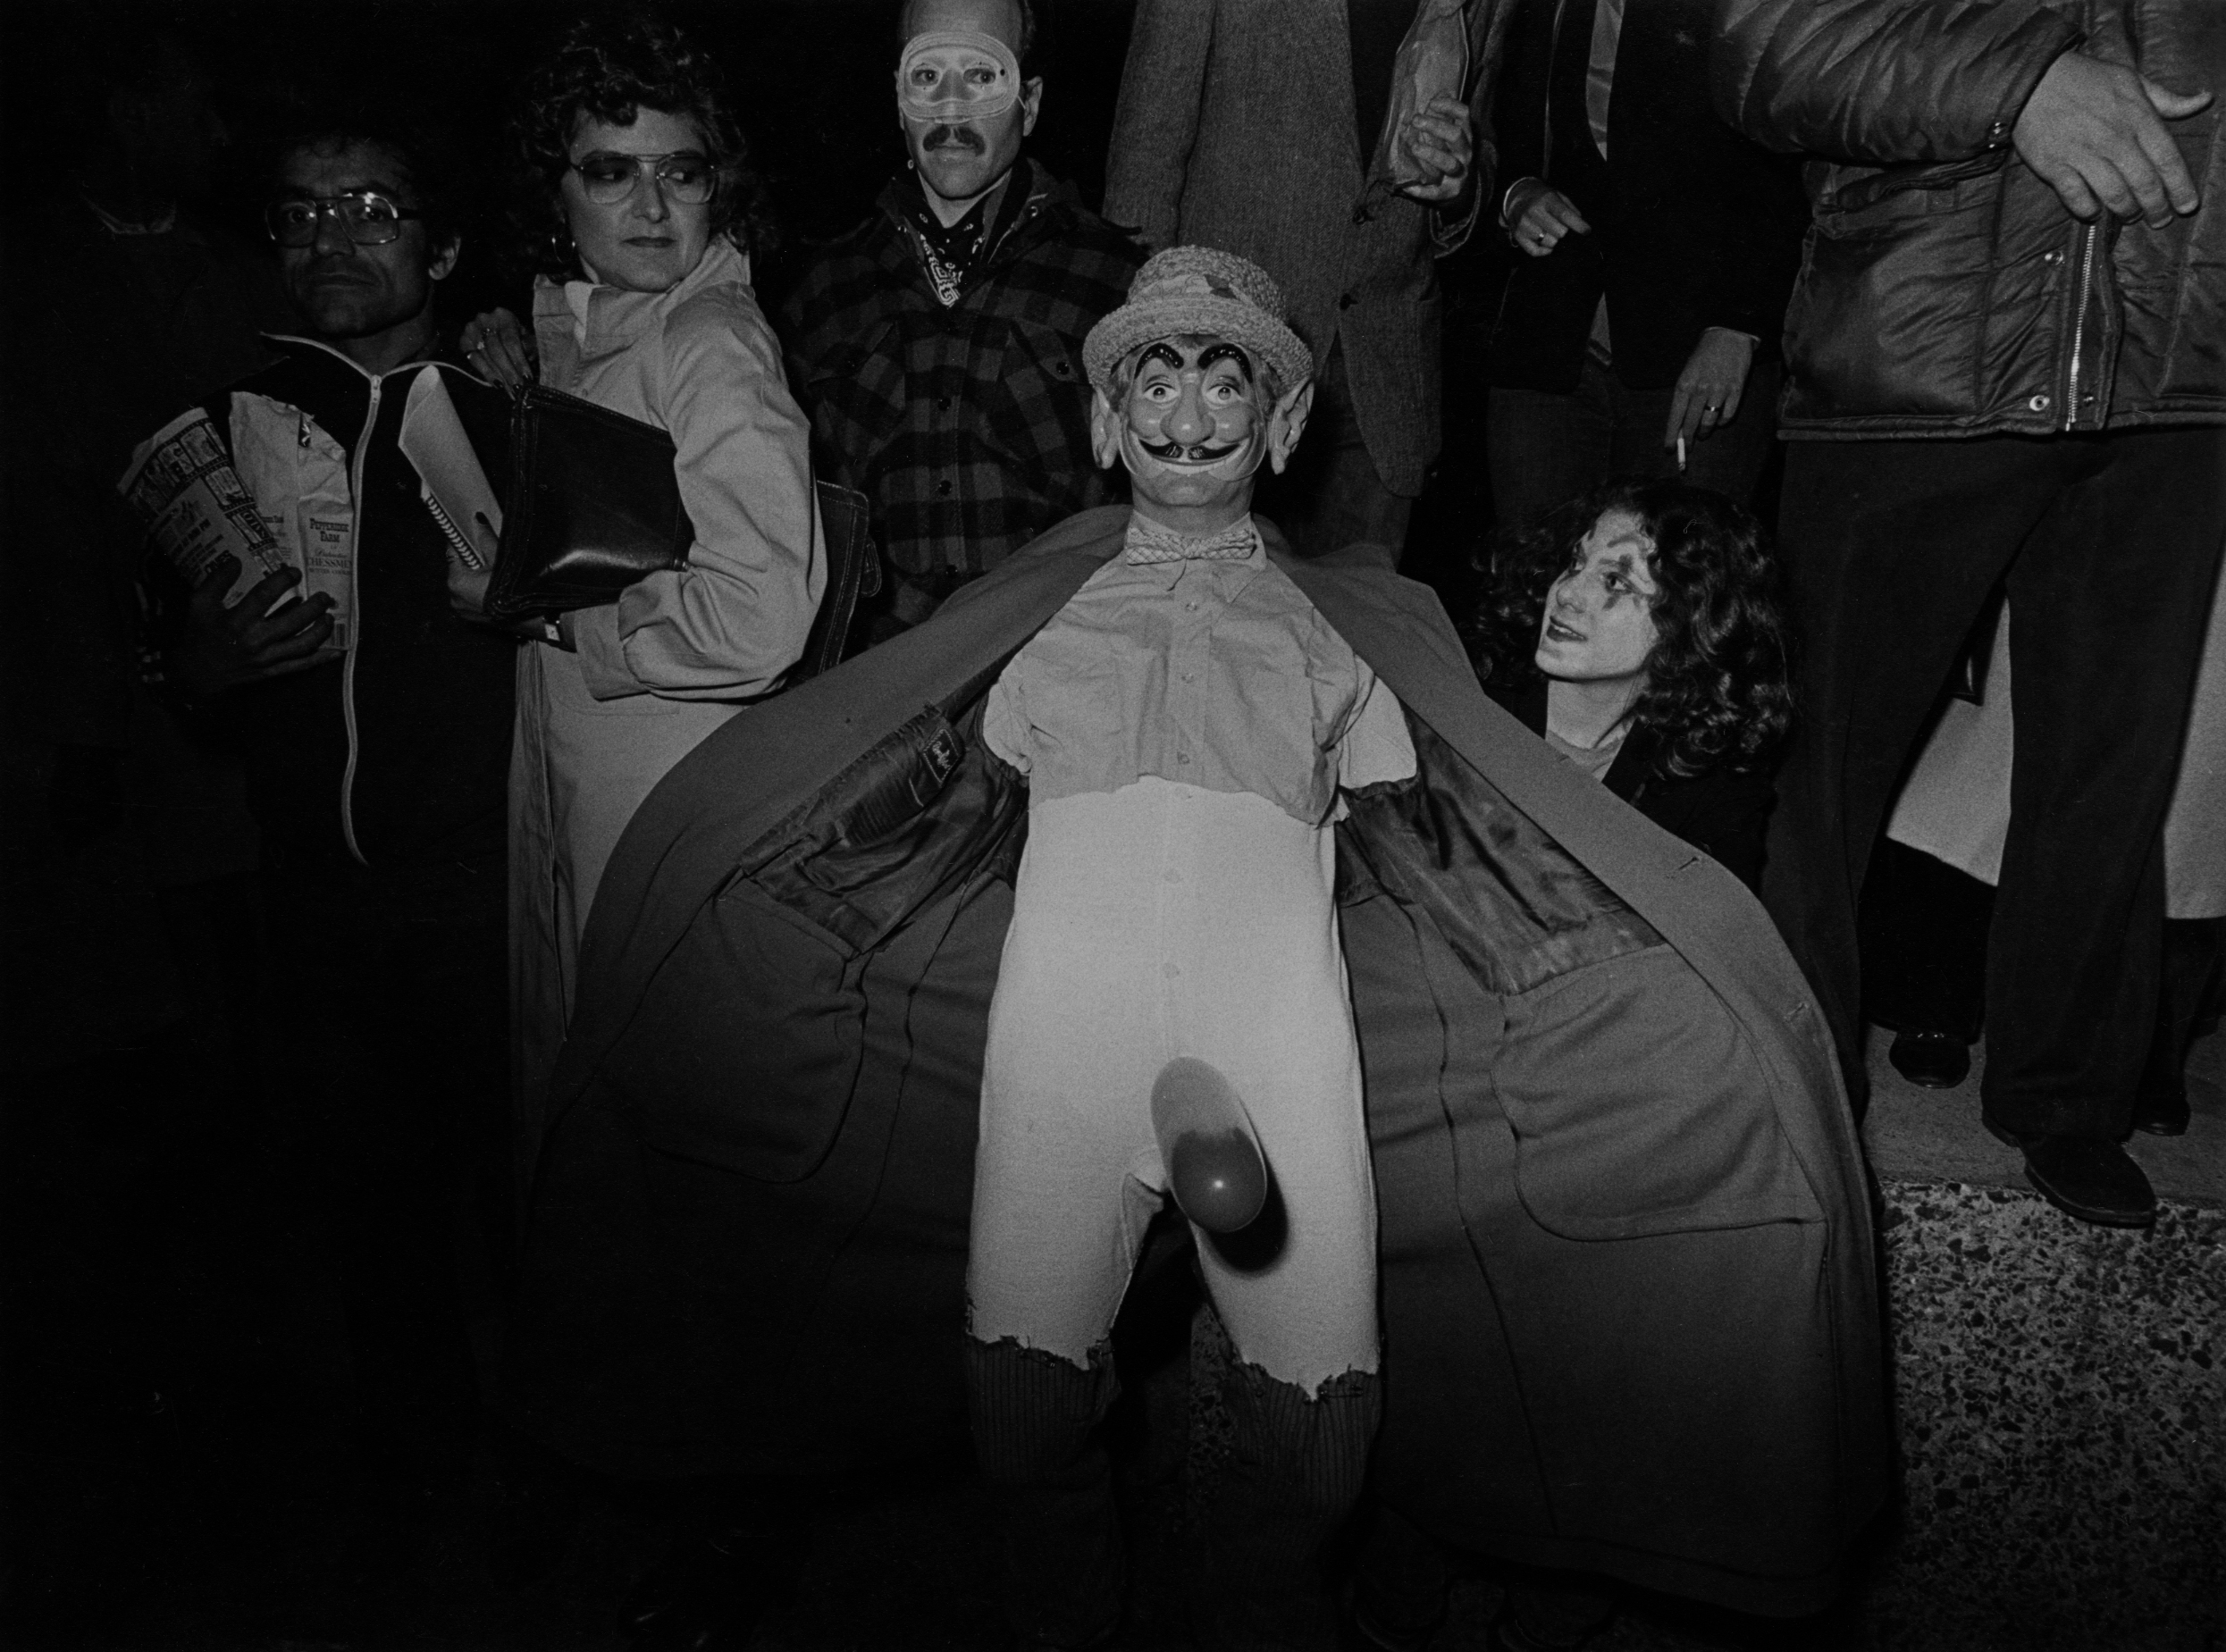 A flasher revels in the crowd at the New York City Halloween Parade, 1979.